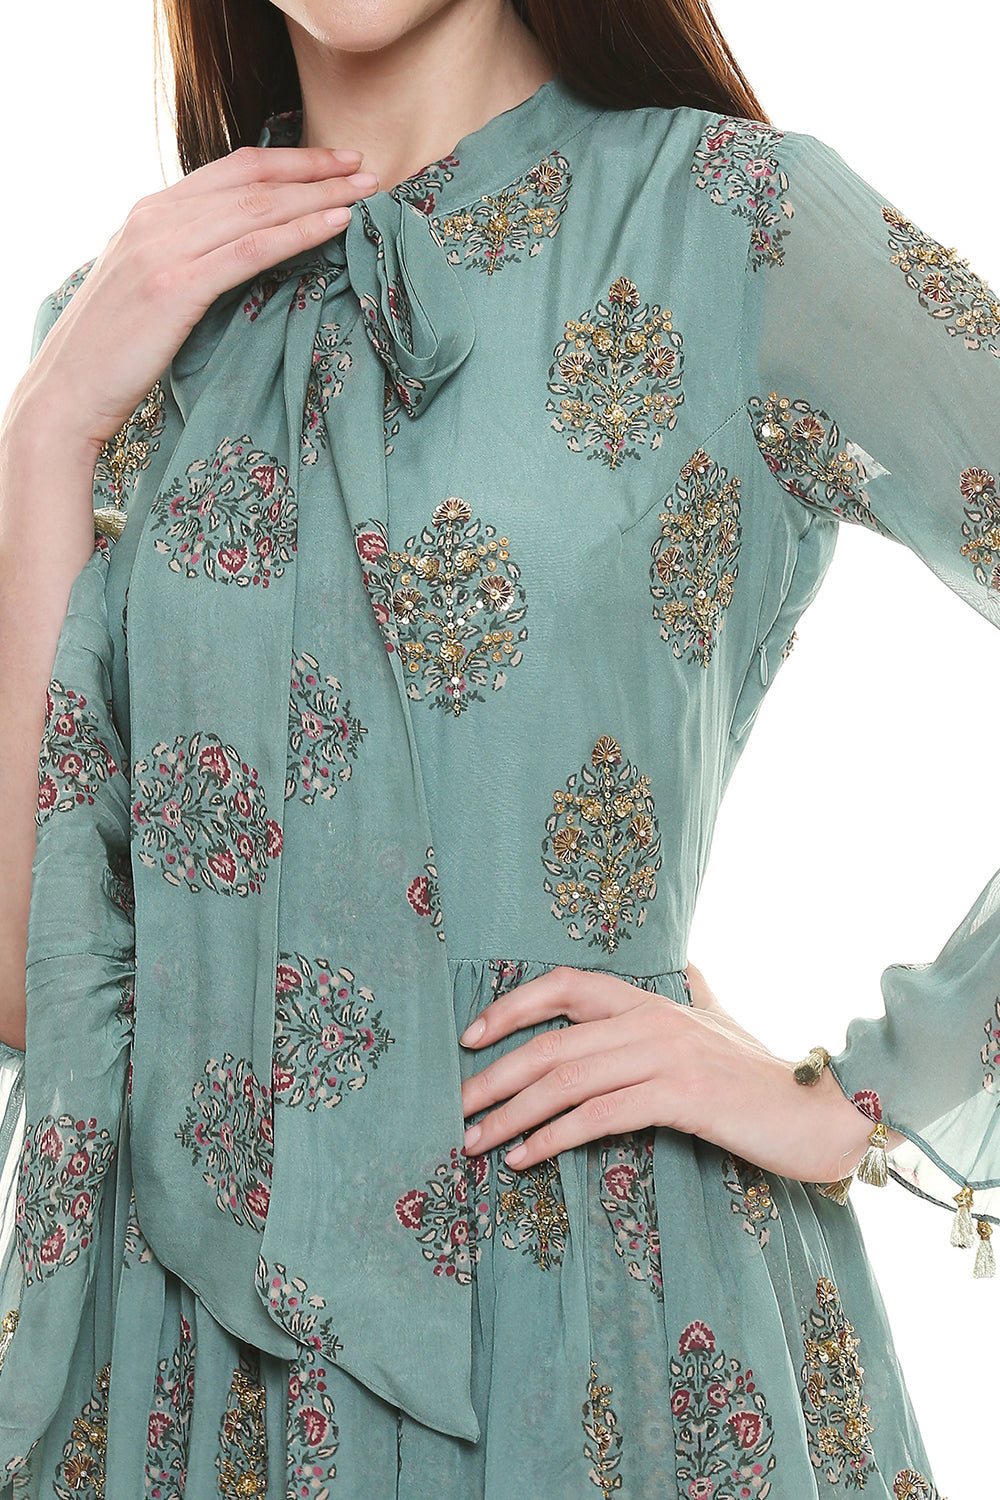 Sage Green Printed Top With Pants Gatheres At Waist And Bell Sleeves